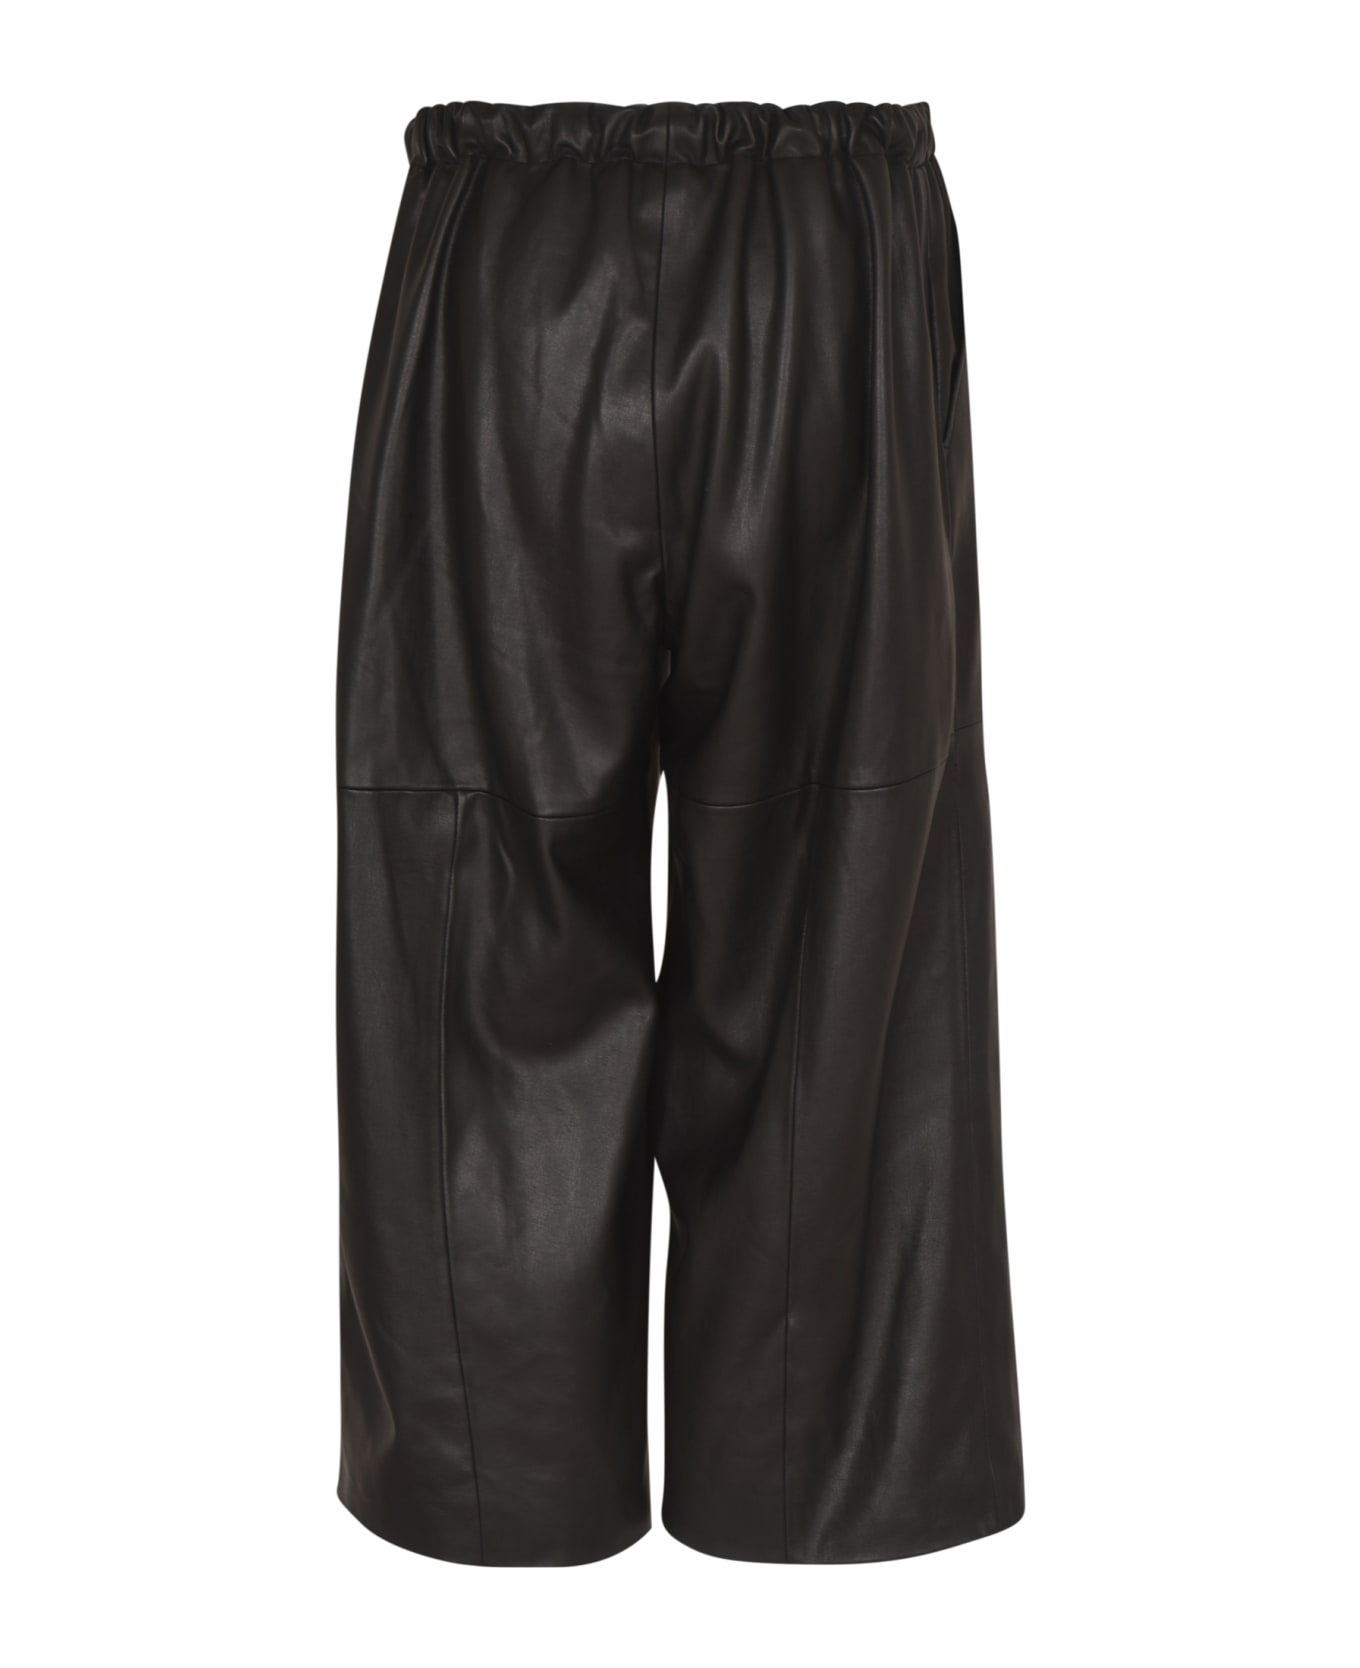 VIS A VIS Elastic Waist Cropped Shiny Trousers - Black ボトムス